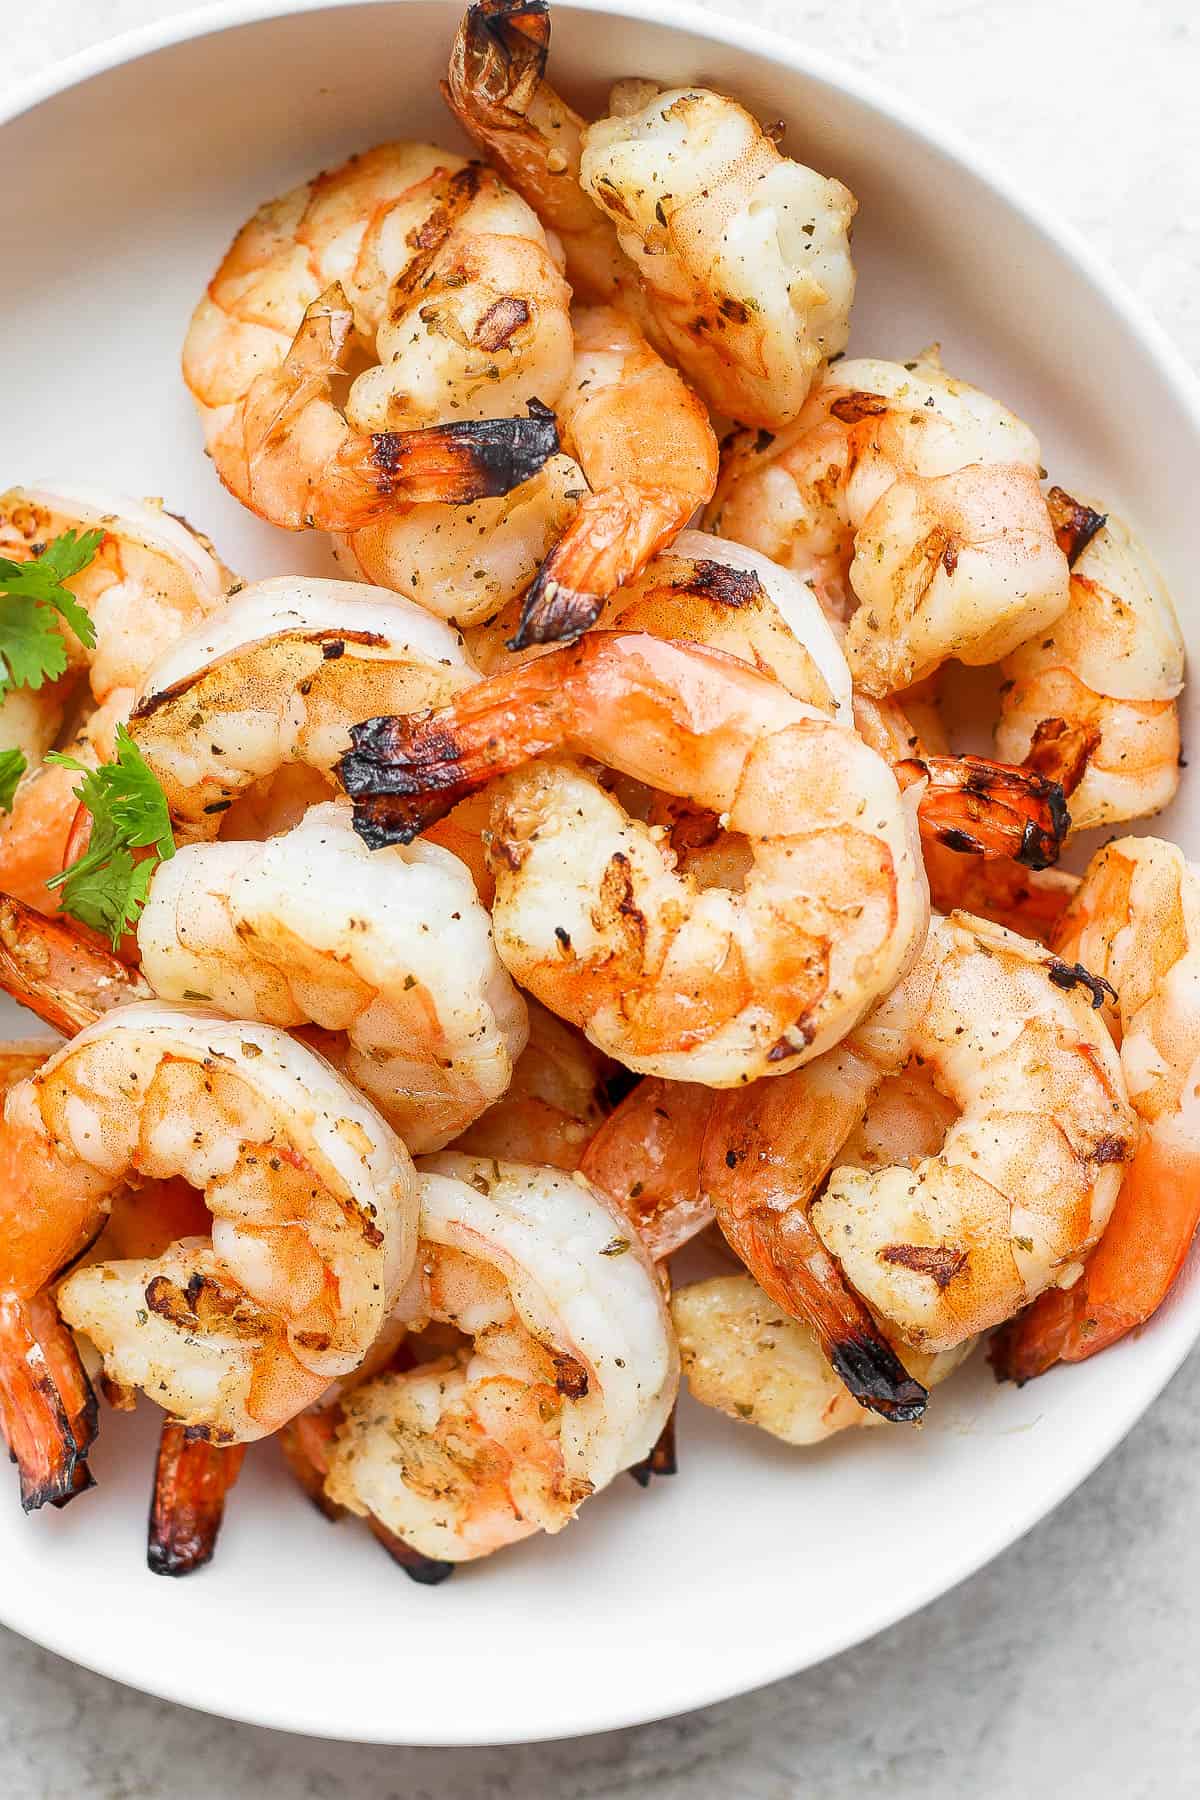 Marinated shrimp that have been grilled in a bowl.